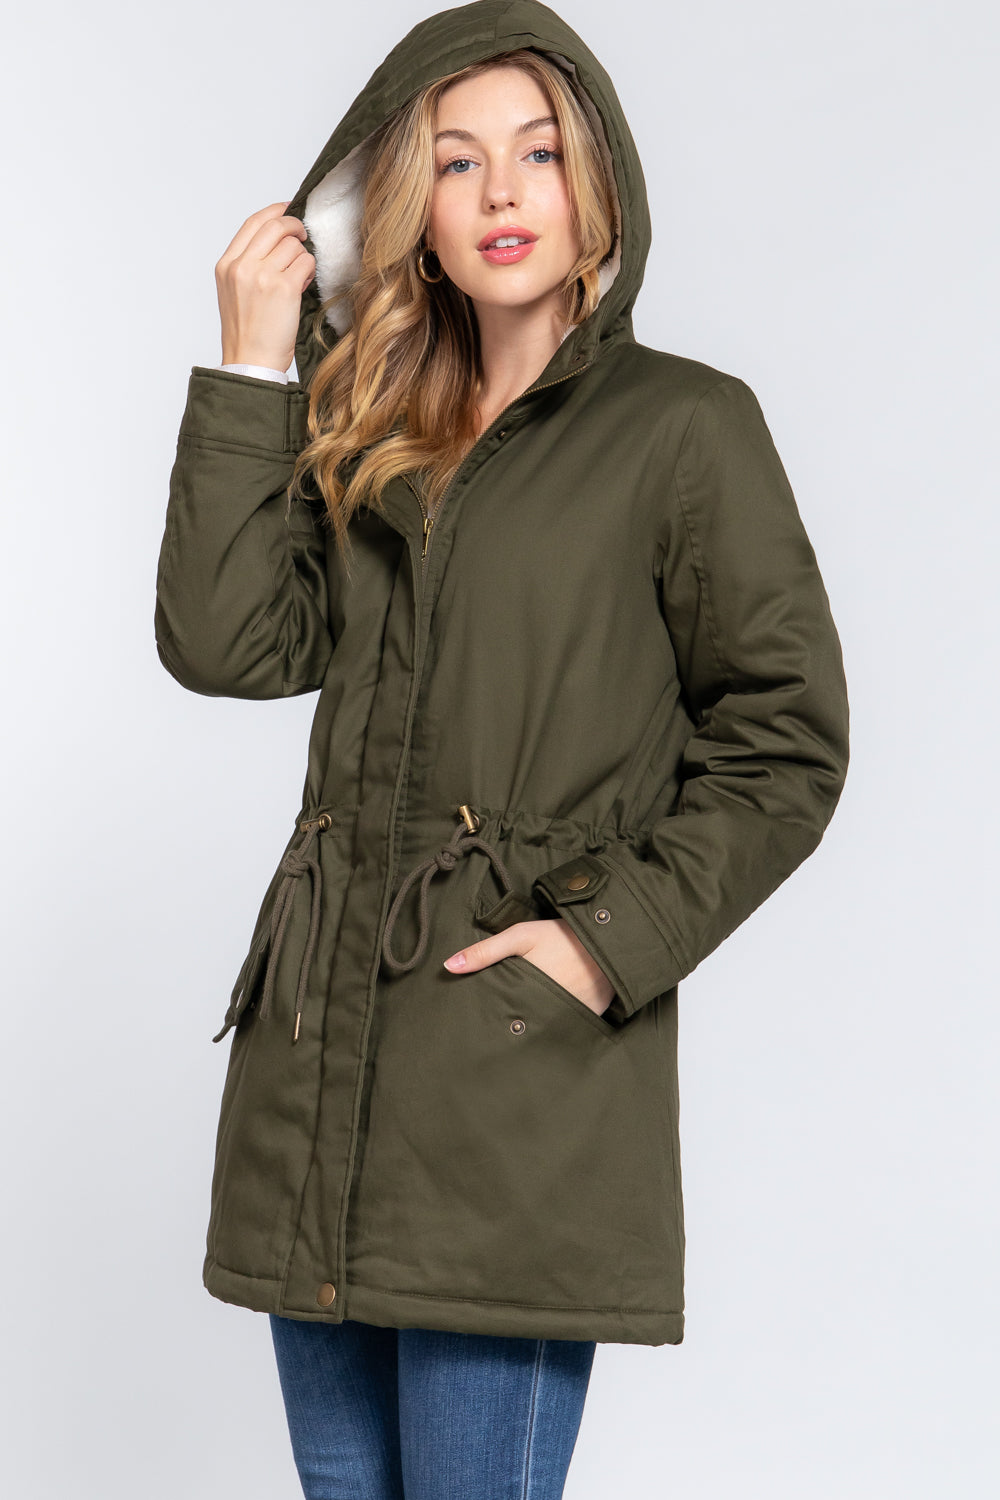 Olive S - Fleece Lined Fur Hoodie Utility Jacket - 4 colors - womens jacket at TFC&H Co.